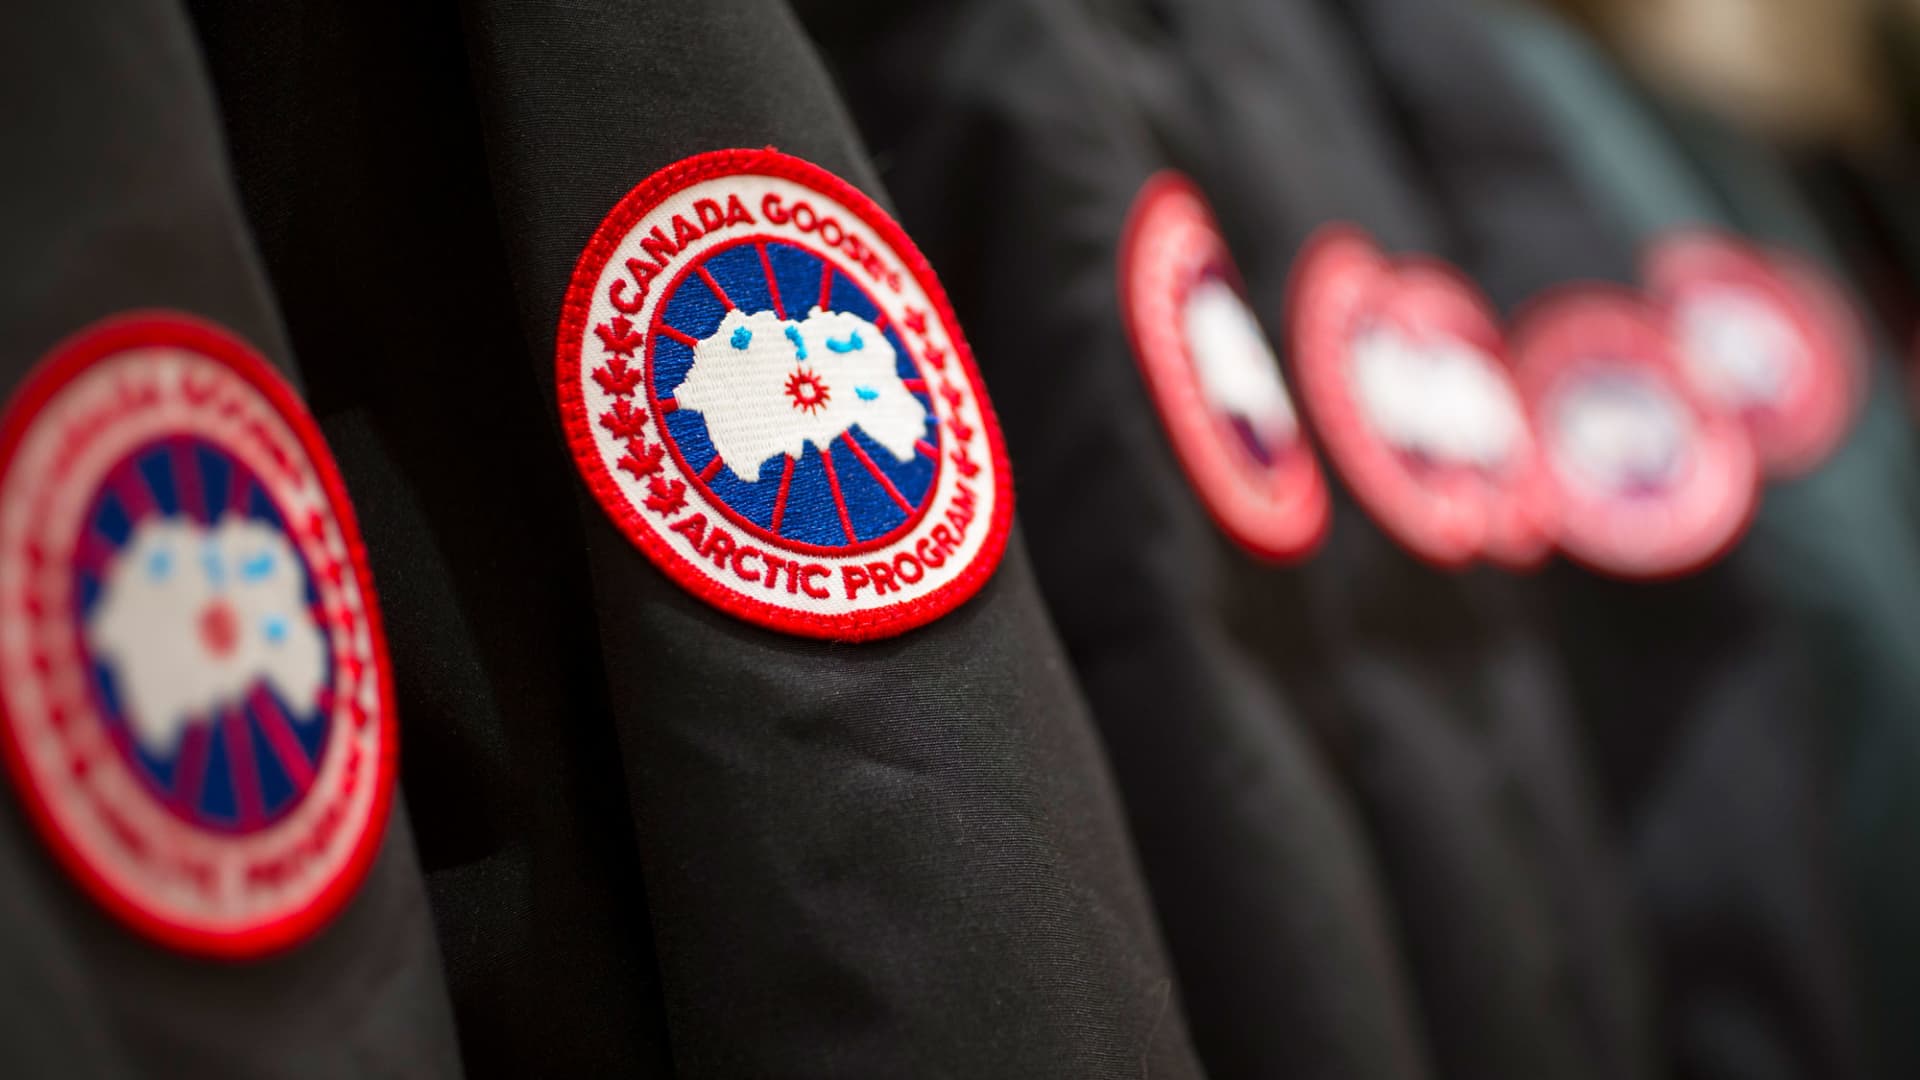 Canada Goose to cut 17% of its corporate workforce [Video]